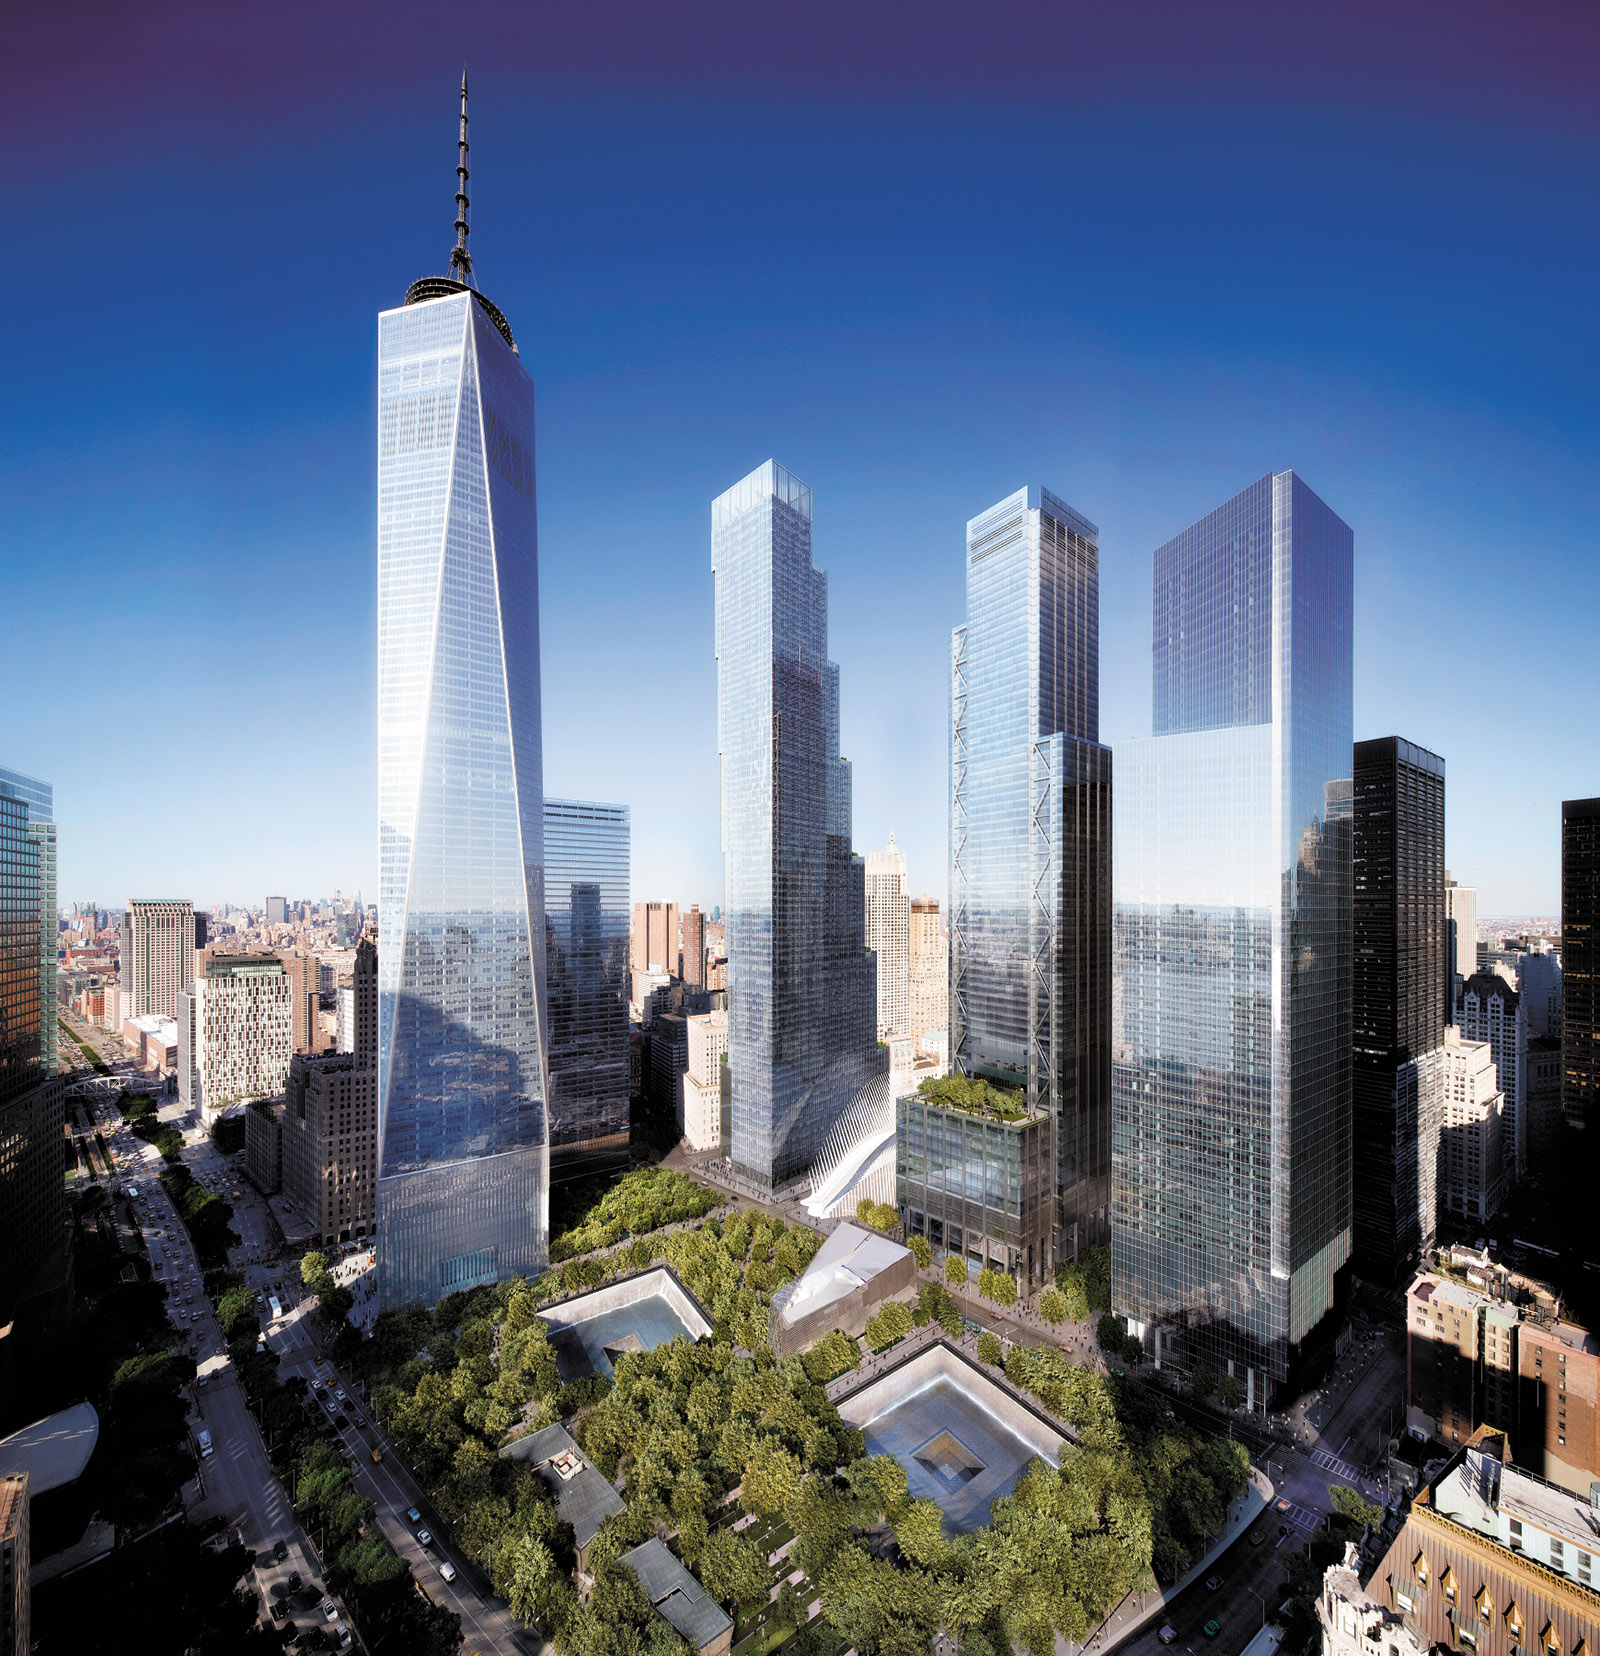 A rendering of the new World Trade Center buildings in Lower Manhattan, with the reflecting pools of the National September 11 Memorial in the foreground. Three of the buildings have been completed, including One World Trade Center (far left).